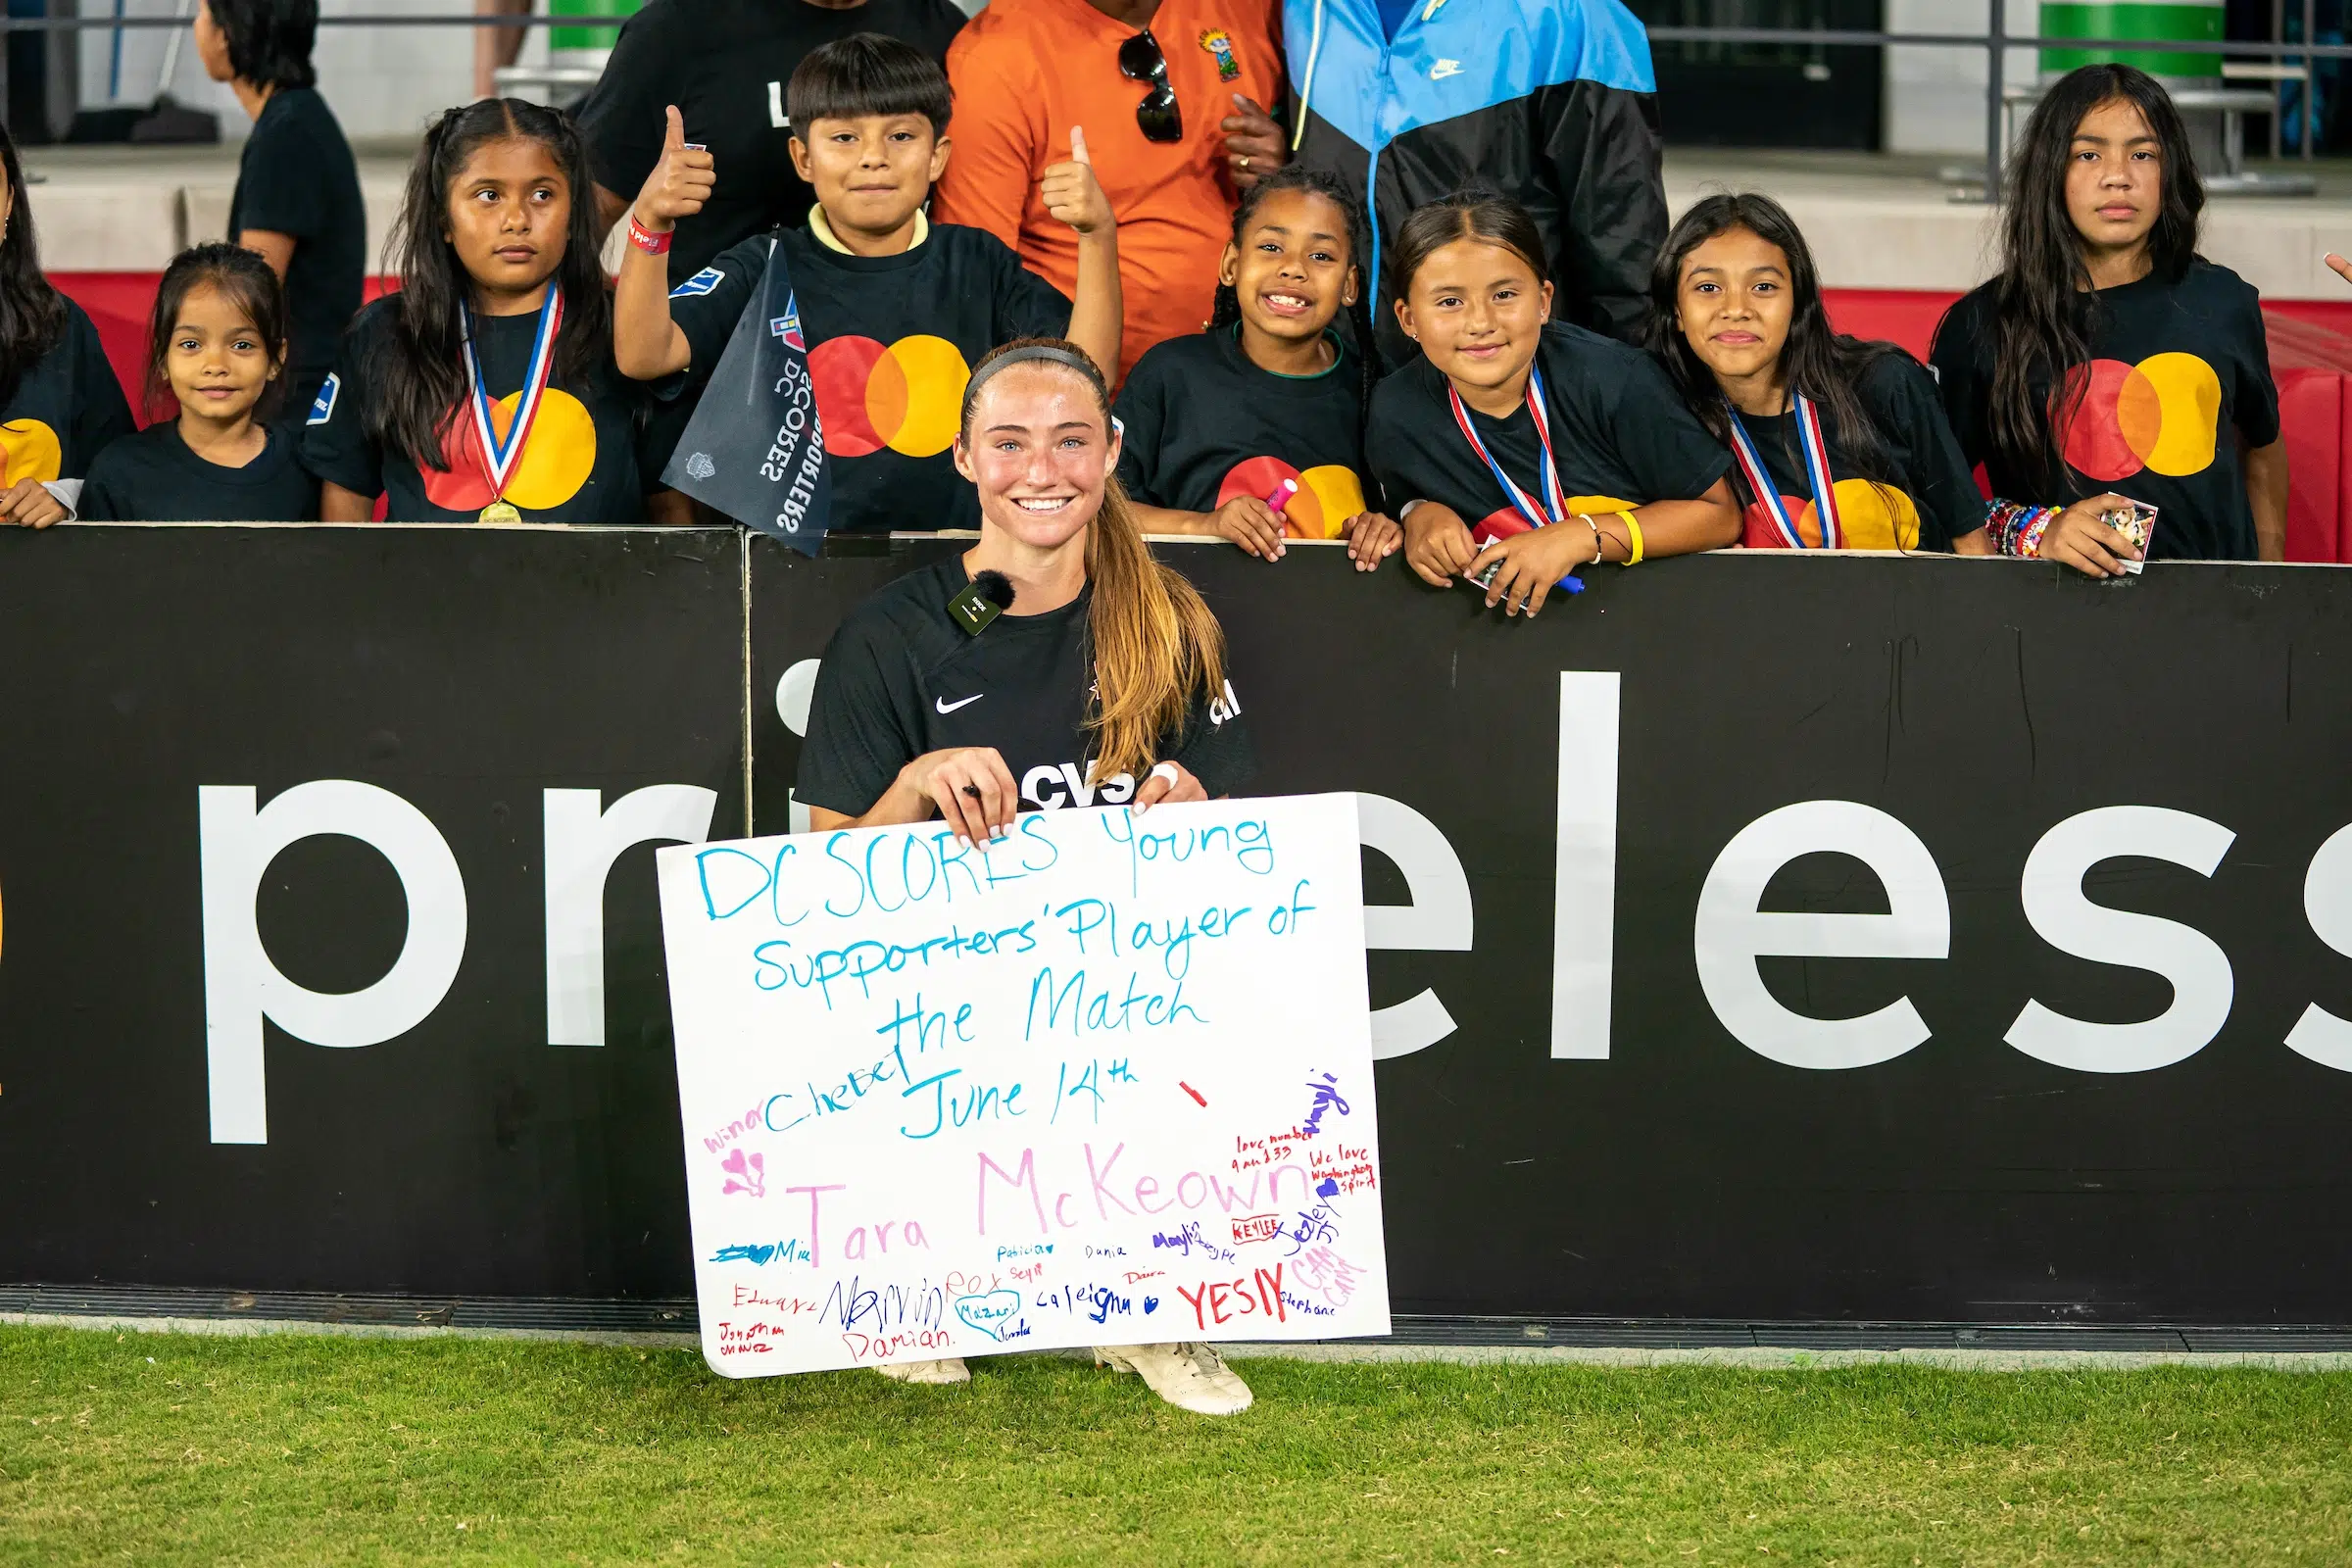 Tara McKeown poses for a photo holding a poster made by the young fans in the photo who all wear black tshirts.